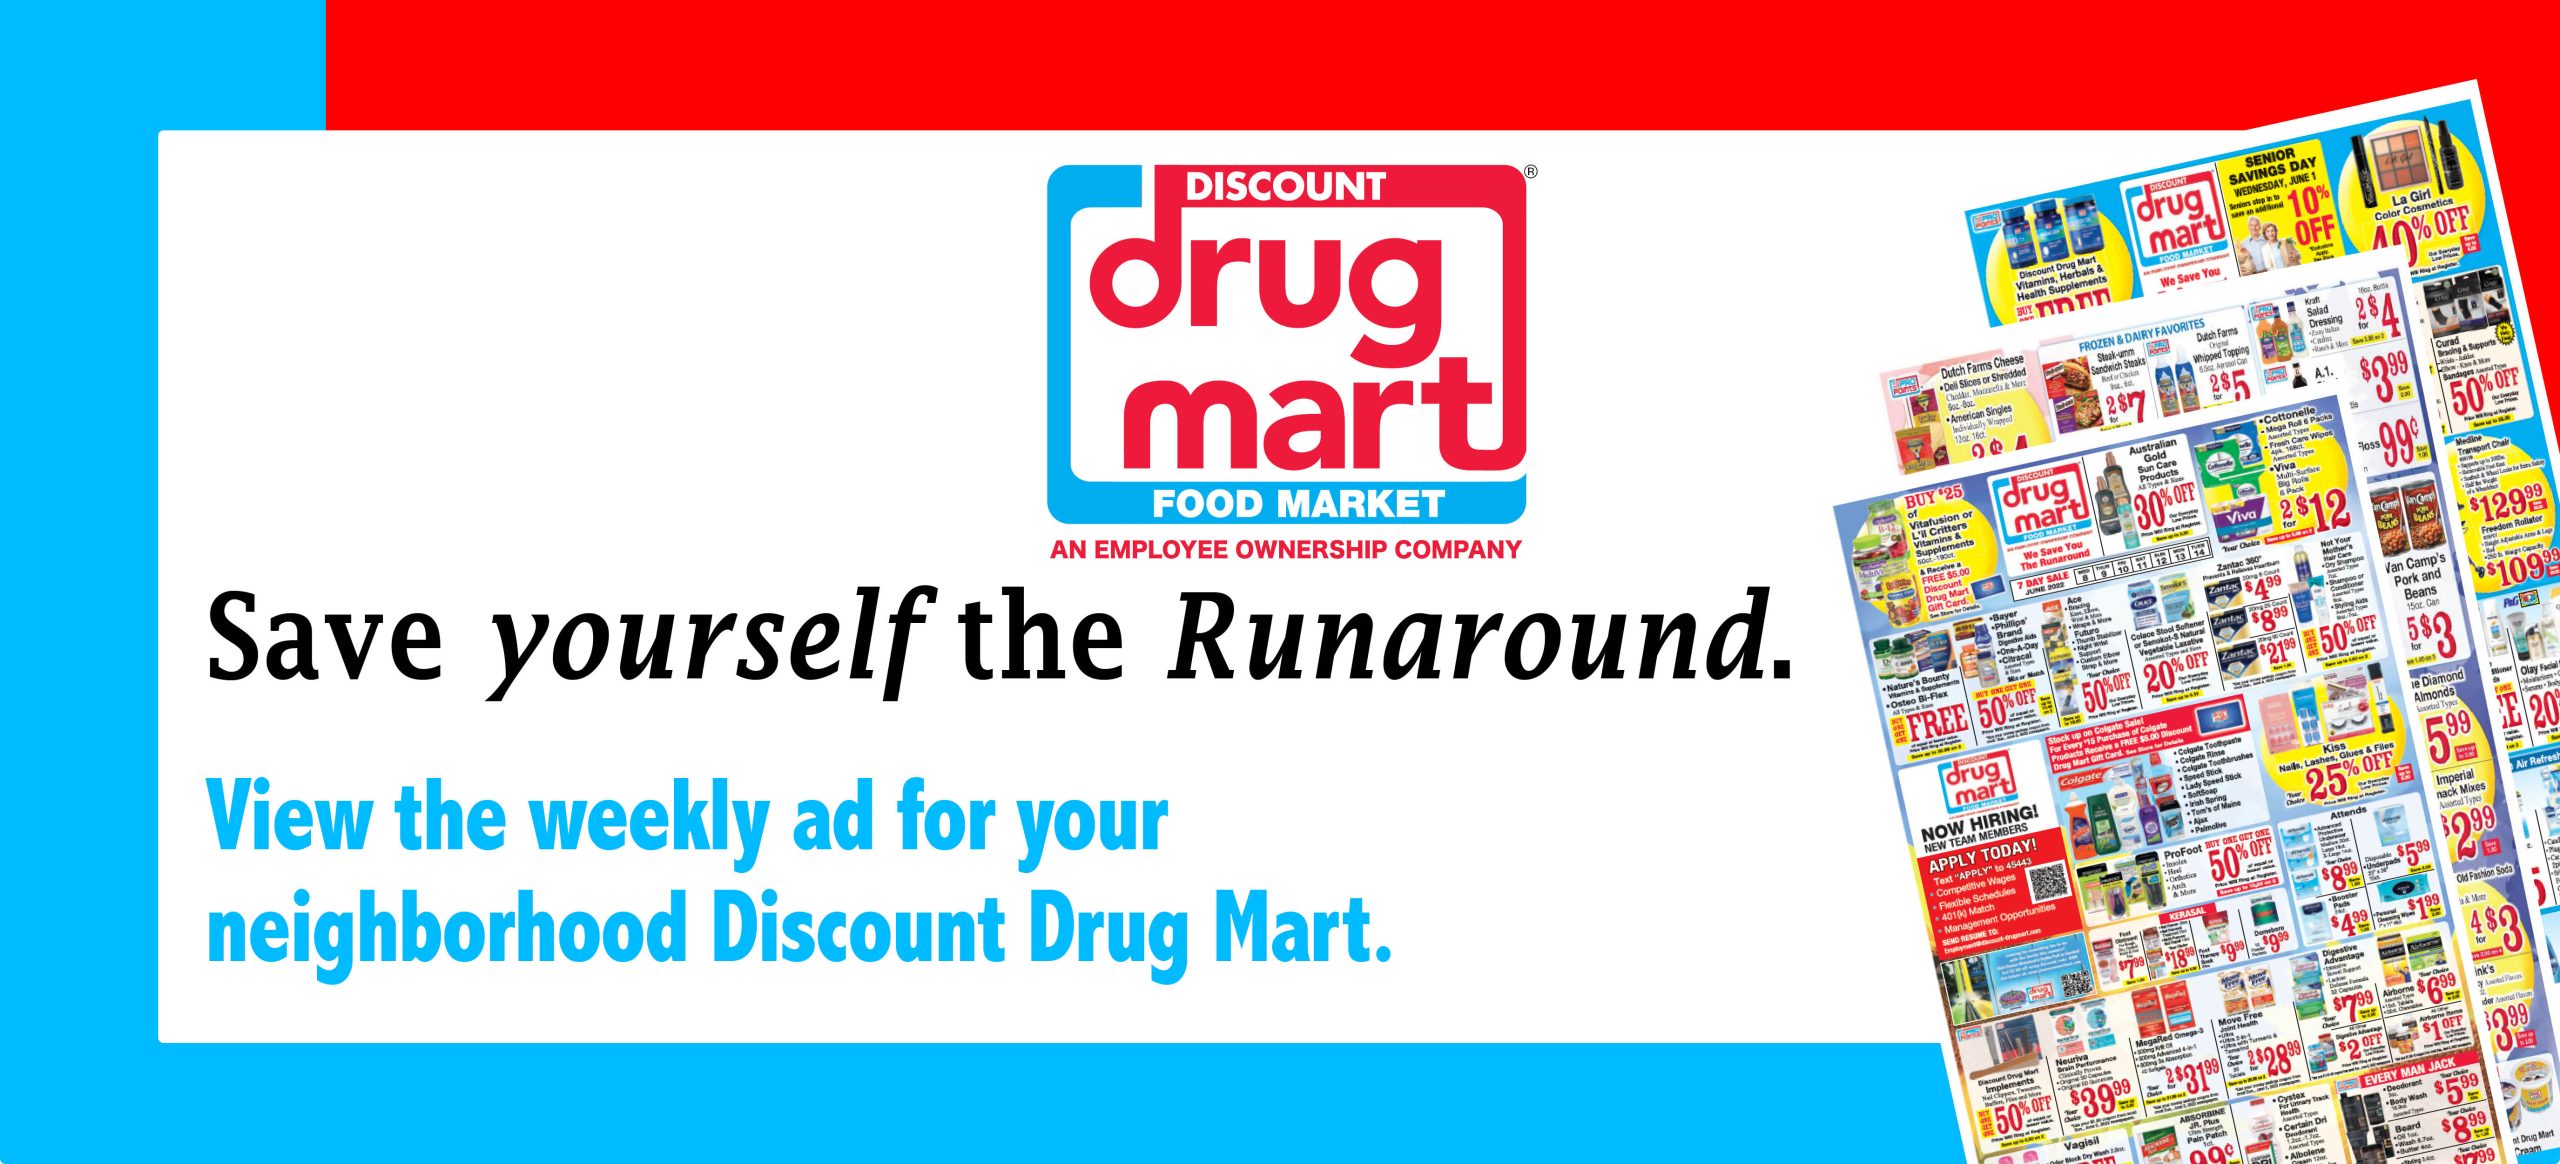 Discount Drug Mart Weekly ads preview 